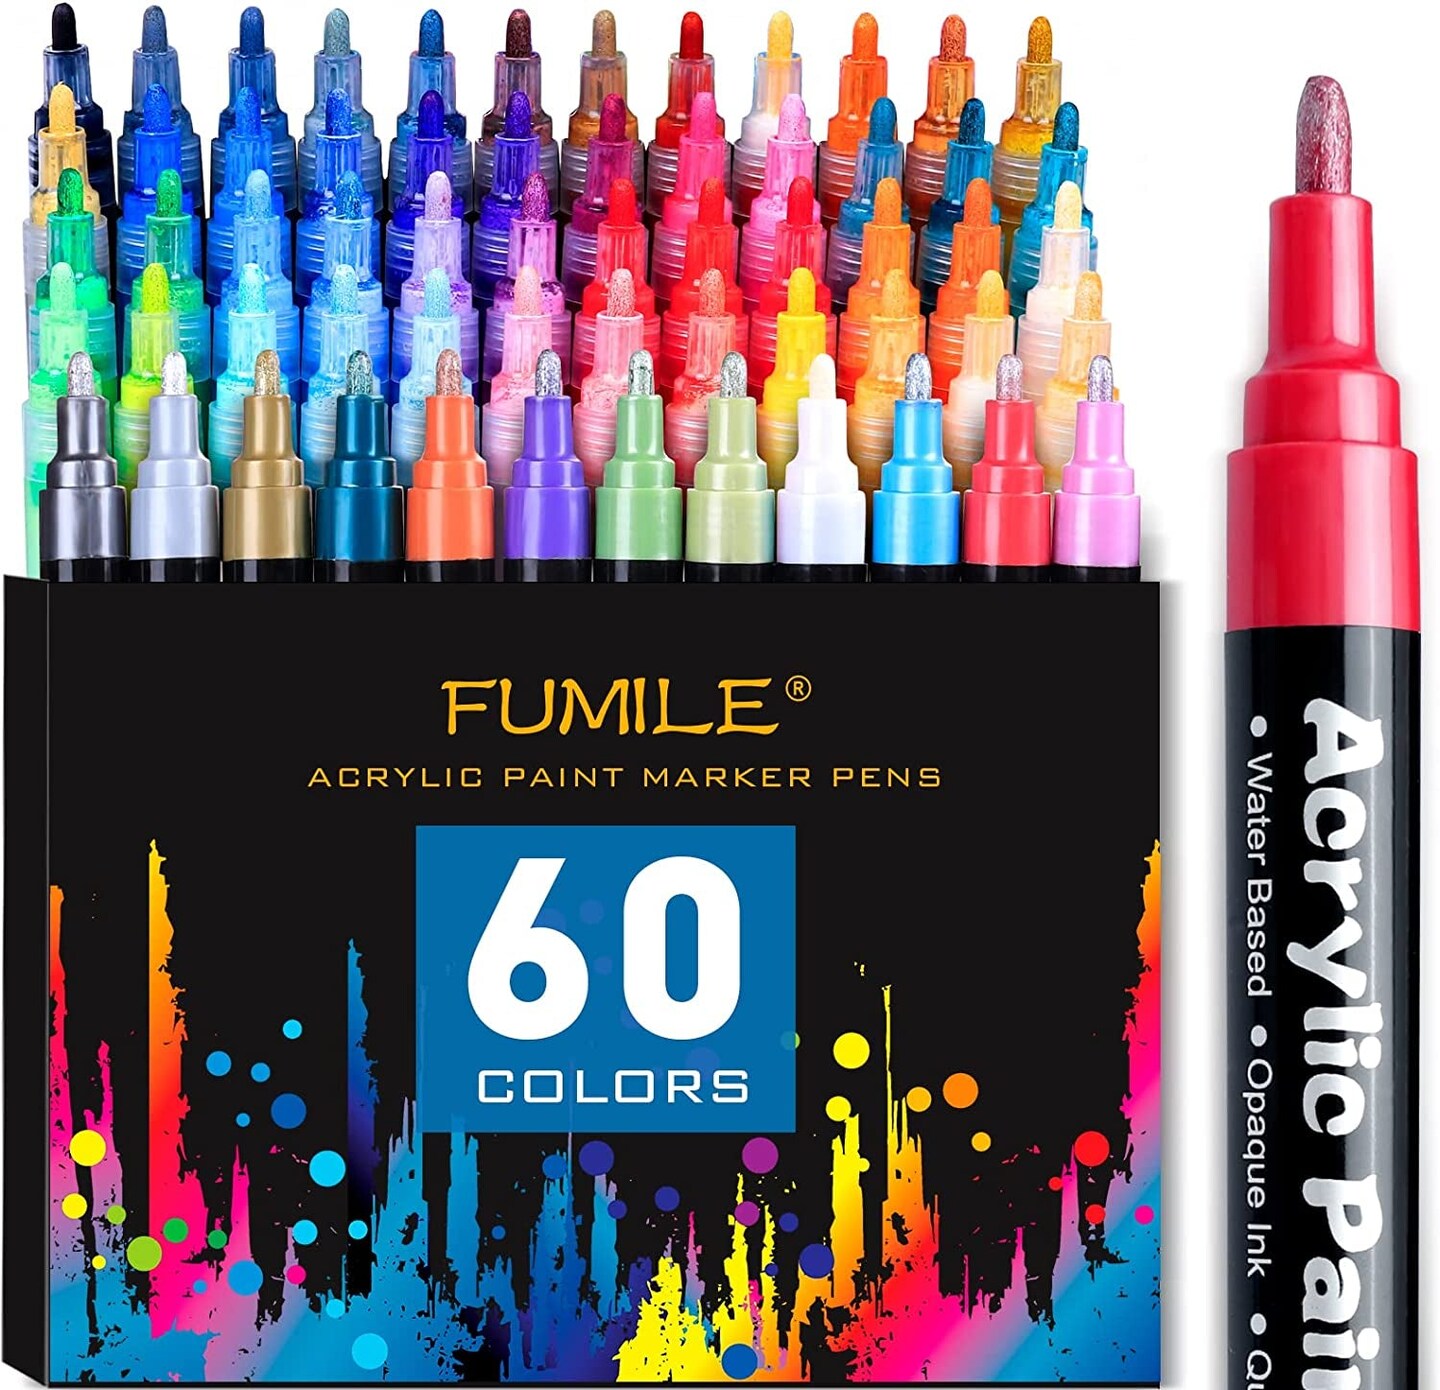 FUMILE 36 Colors Paint Pens Paint Markers, Acrylic Paint Pens for Wood,  Rock Painting, Glass, Ceramic, Canvas, Easter Egg and more Paintings,  acrylic paint set for Painting Supplies, Craft Supplies.